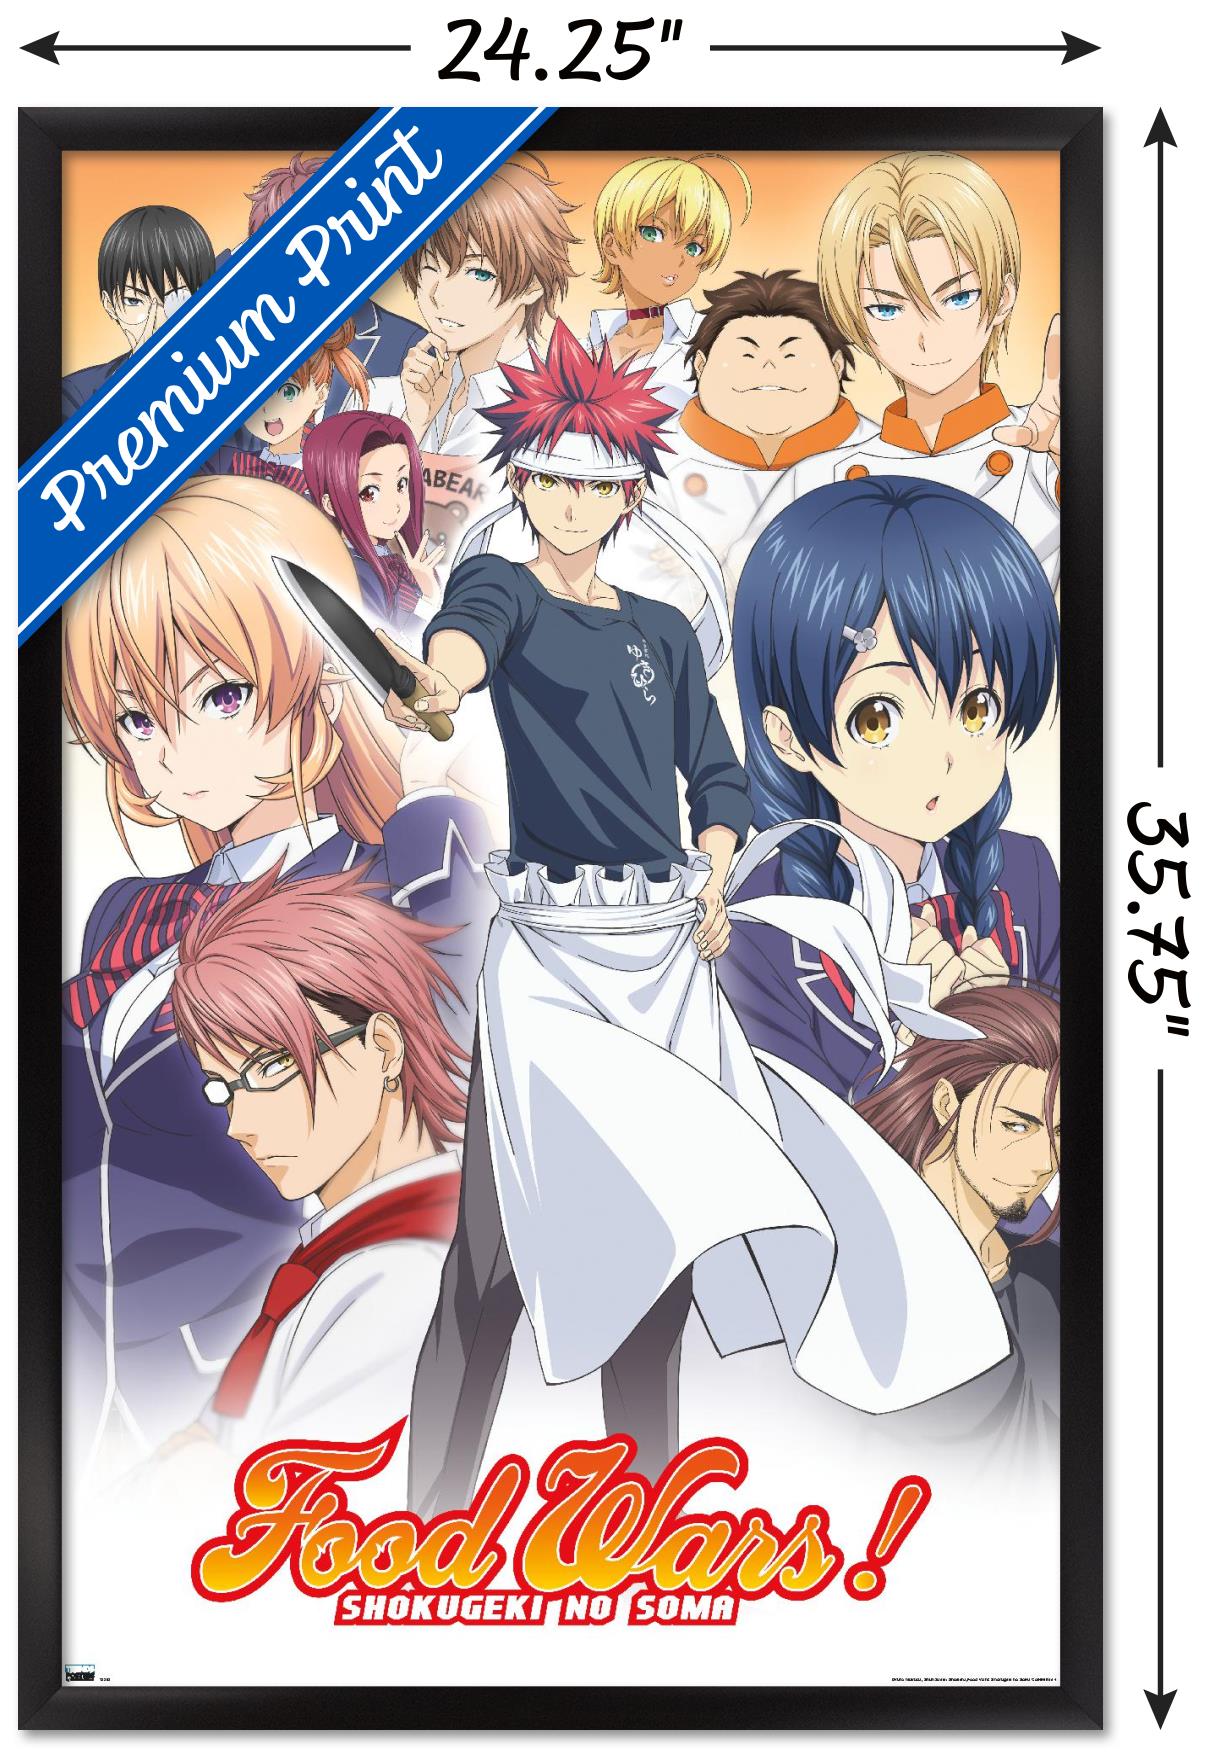 Food Wars! - Group 24.25 in x 35.75 in Framed Poster, by Trends International - image 3 of 6